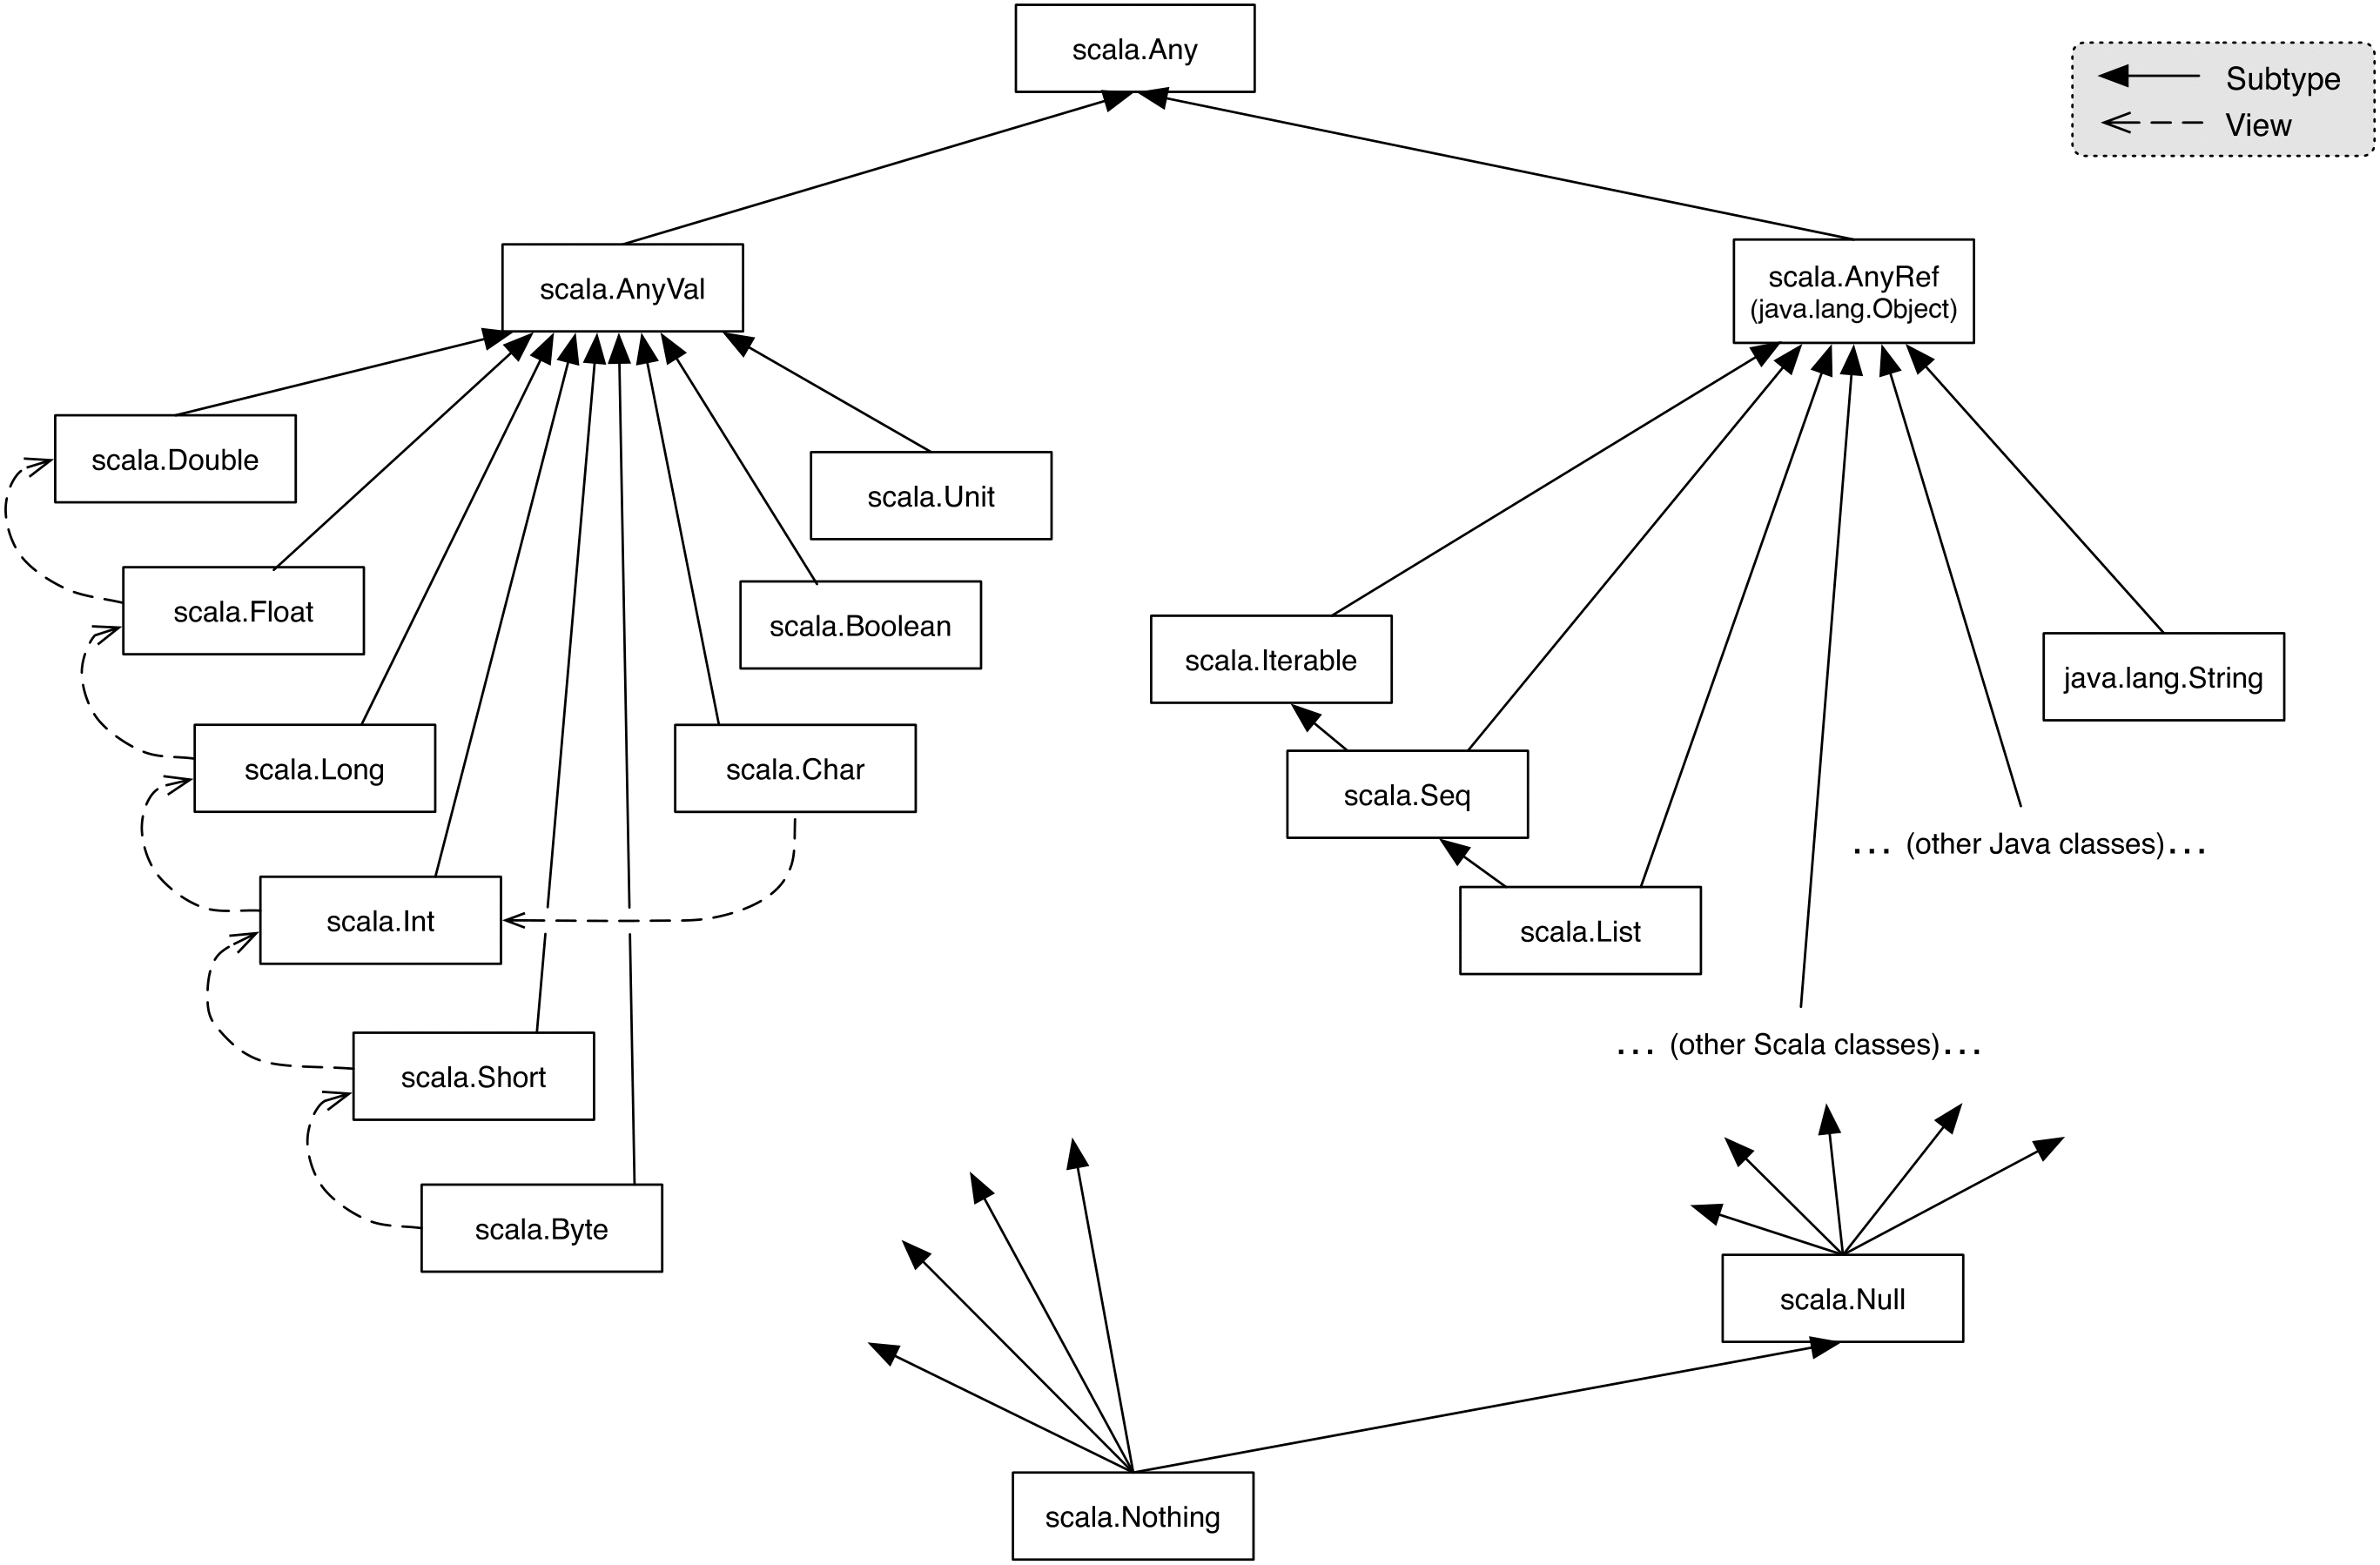 Class hierarchy of Scala